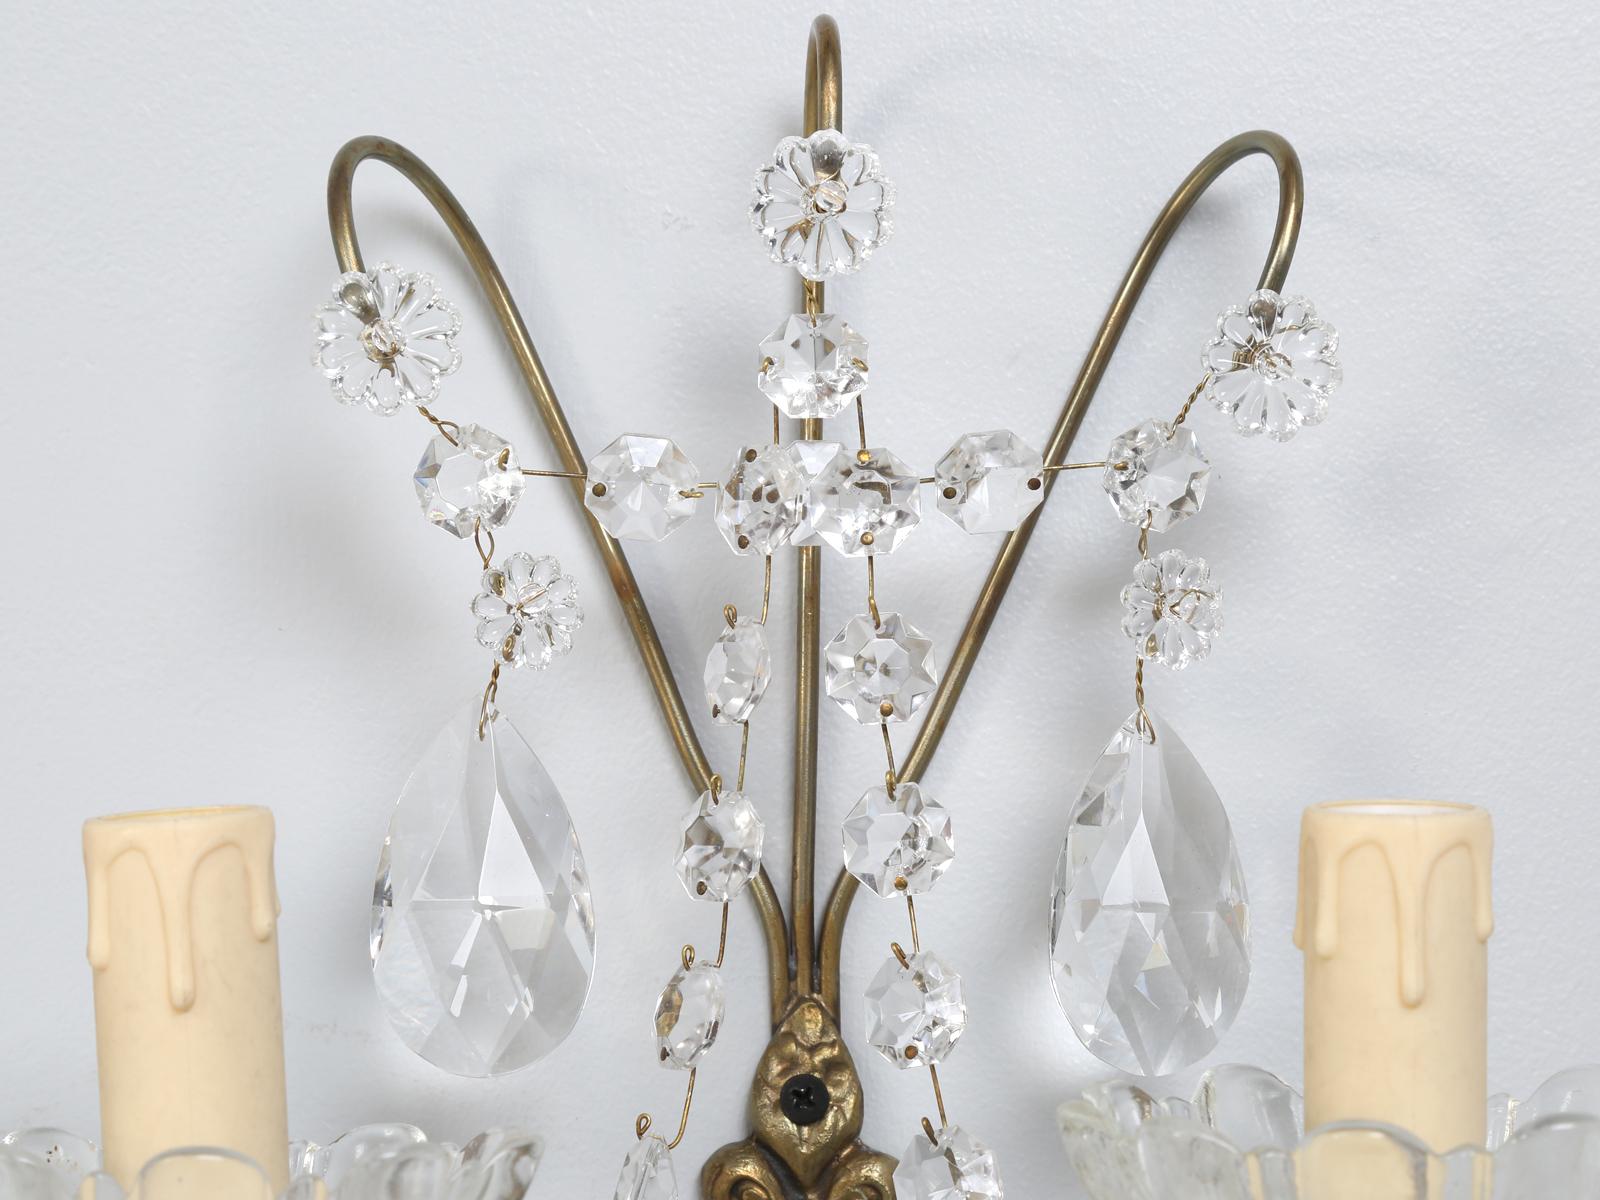 Contemporary French Crystal and Brass 2-Light Sconces, Available Individually or in Pairs